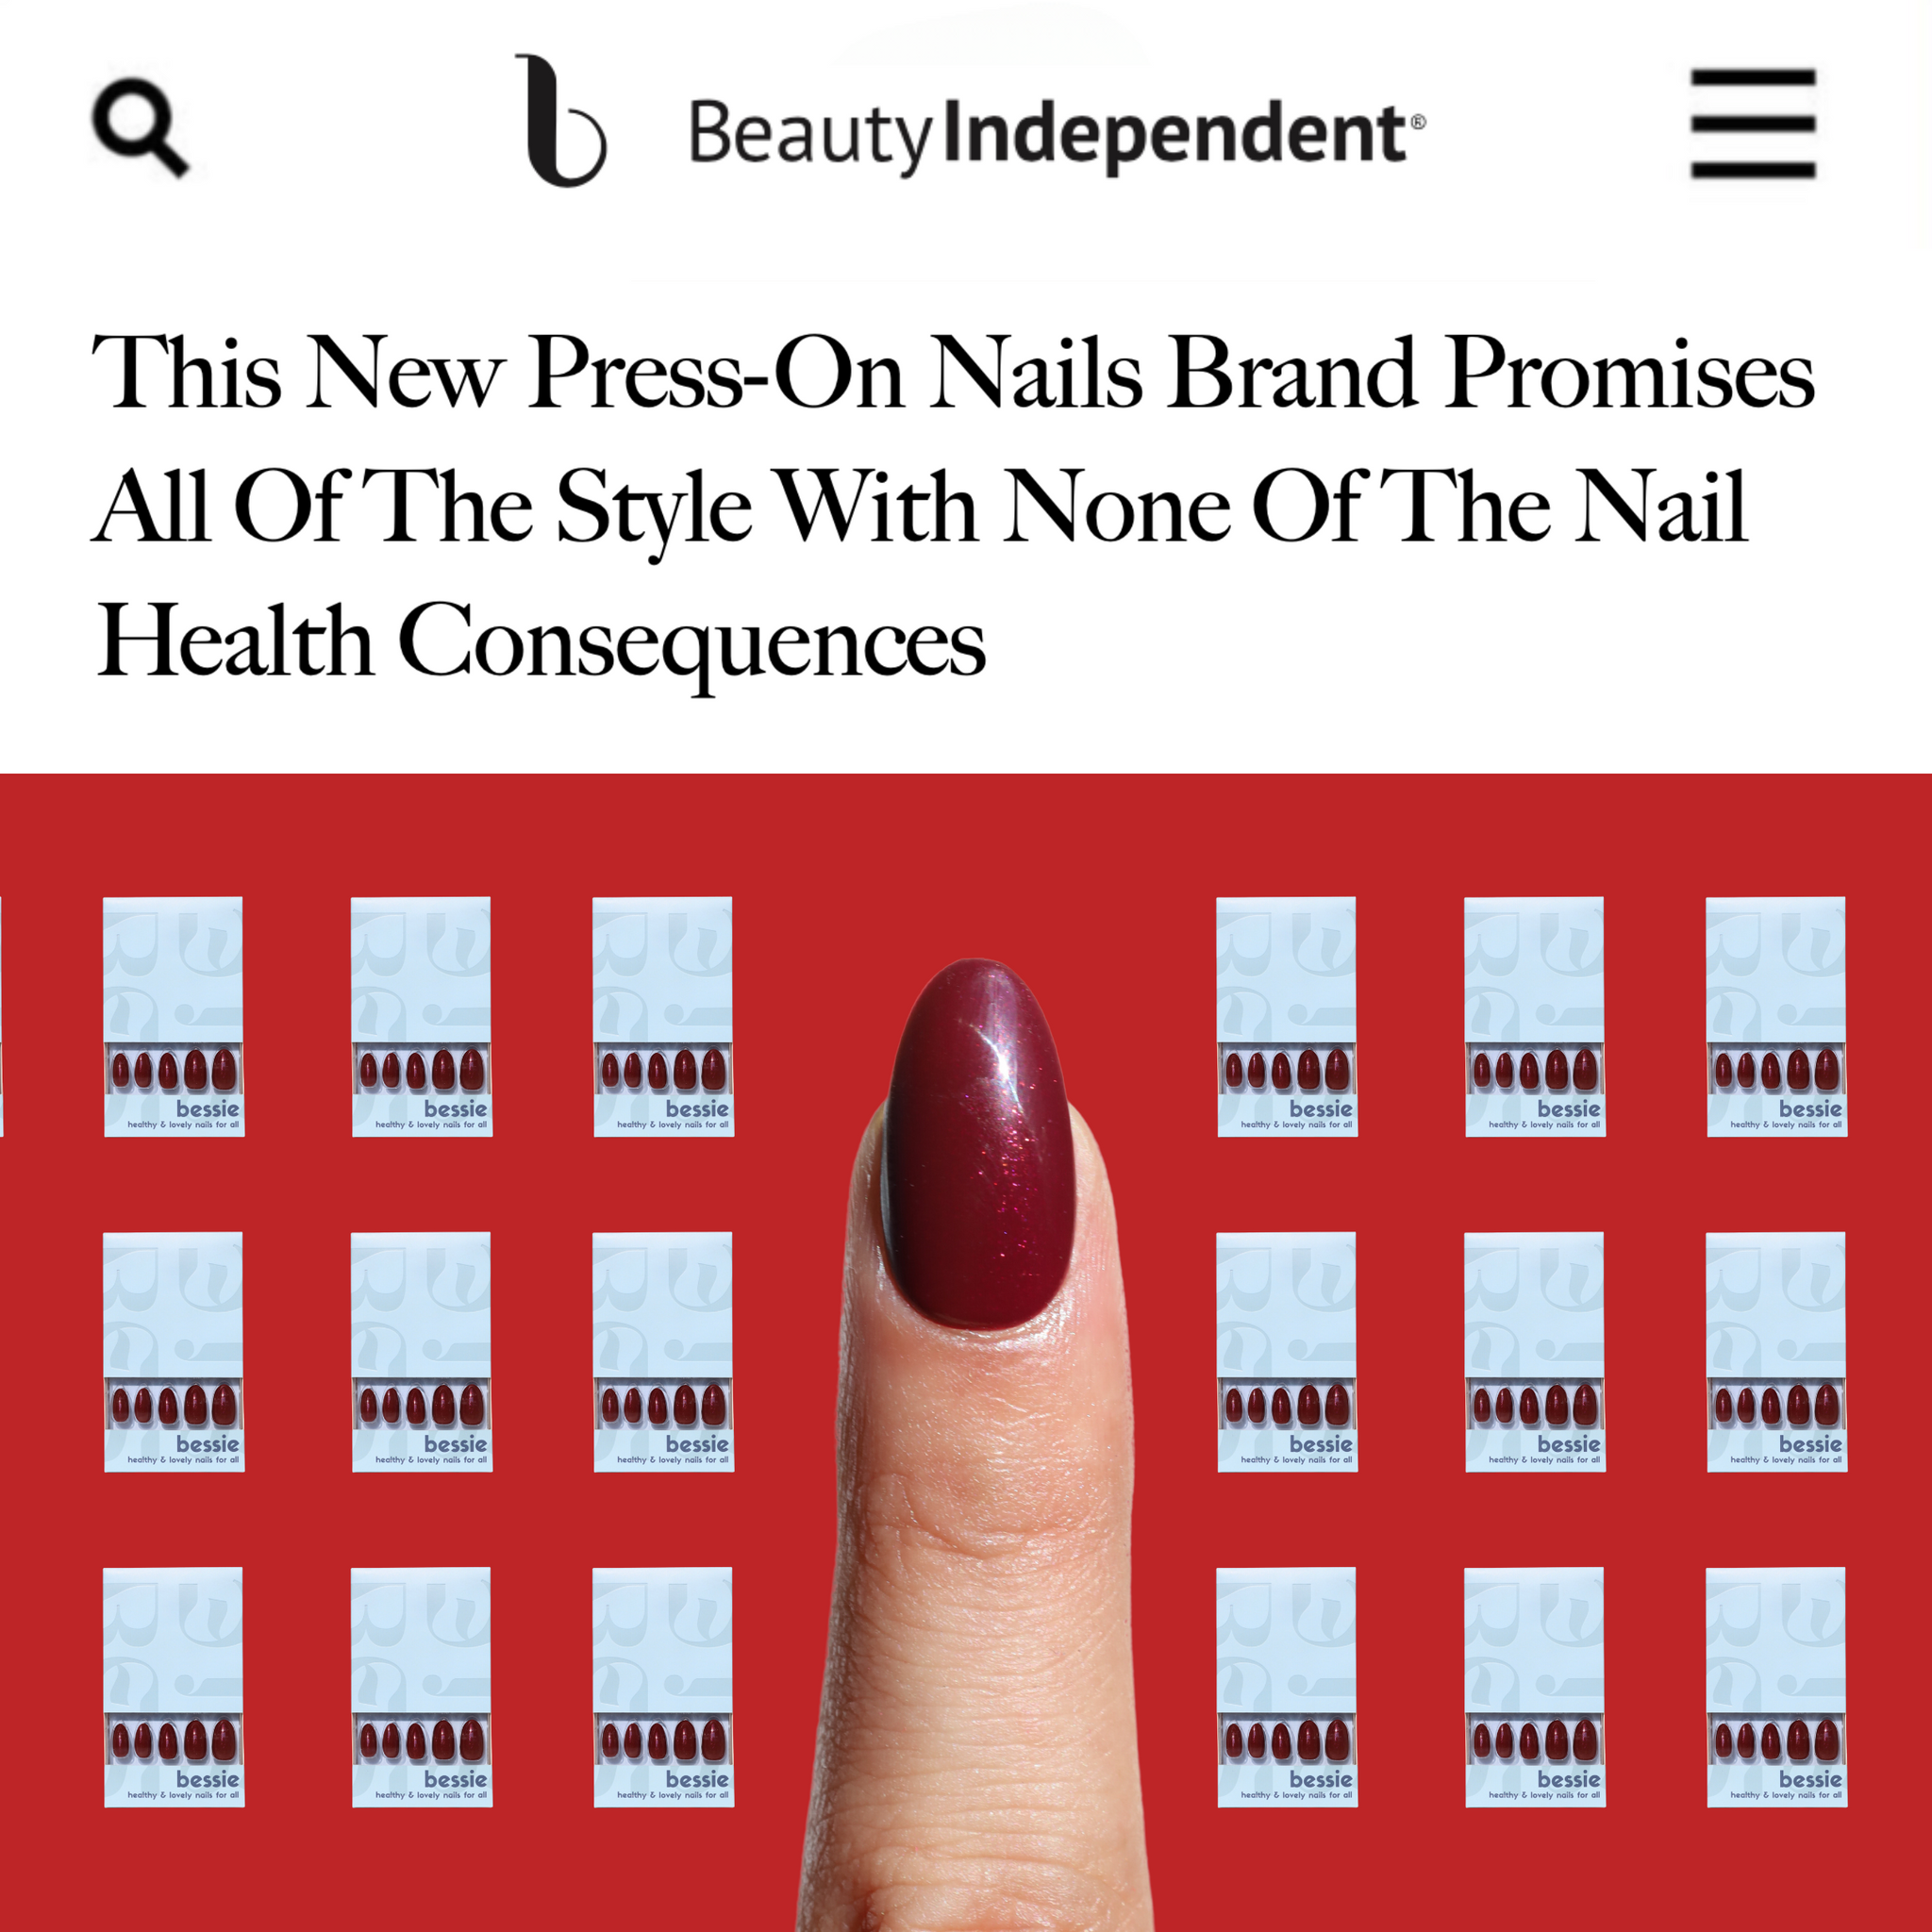 Bessie Nails The Press-on Nails That Puts Your Nail Health First. Beauty Independent Article: This new press-on nails brand promises all of the styles with none of the nail health compromise